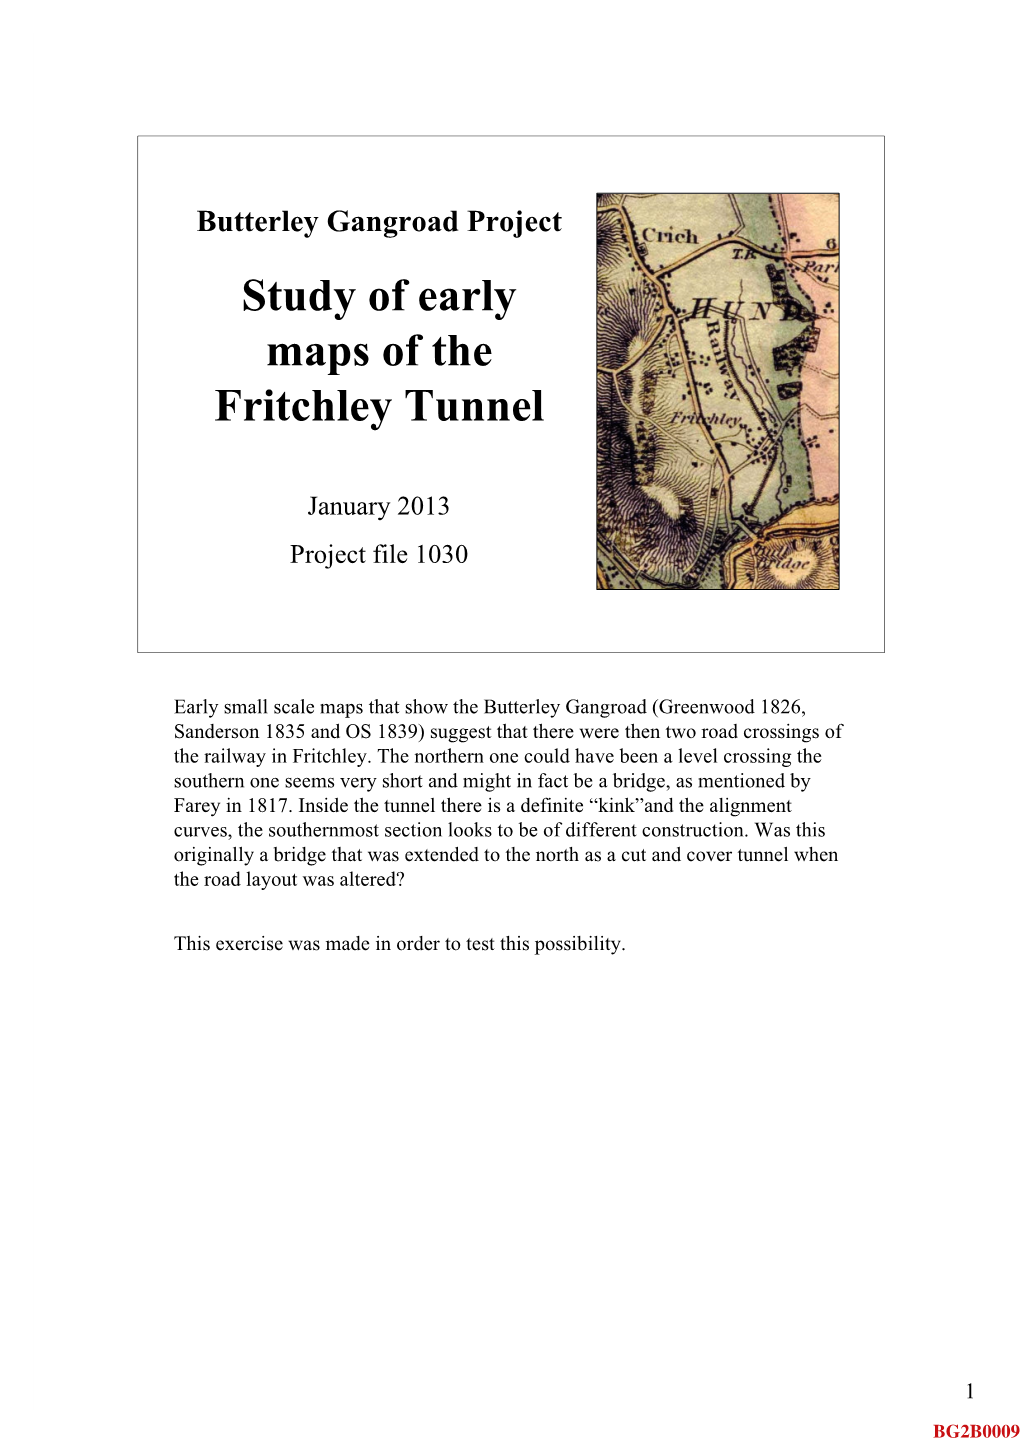 Study of Early Maps of the Fritchley Tunnel